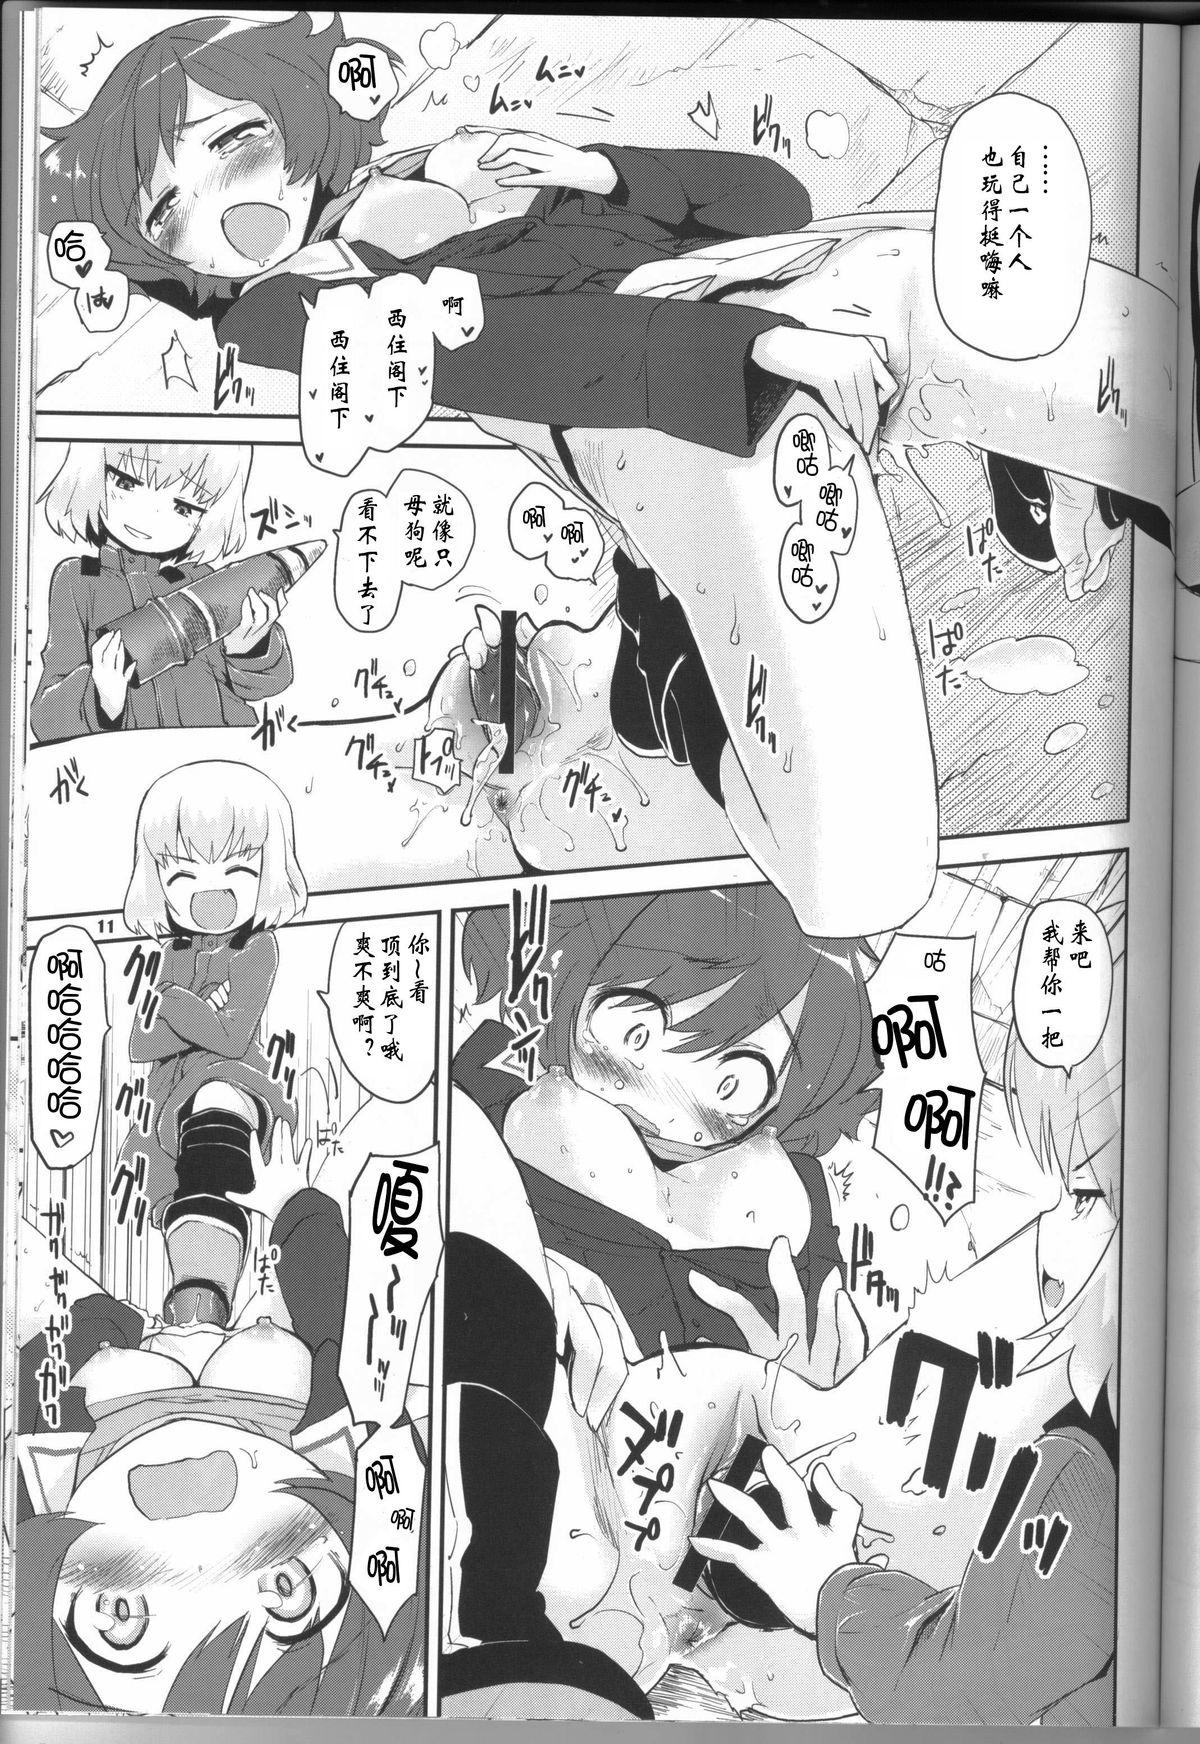 Van The General Frost Has Come! - Girls und panzer Best Blowjob - Page 10